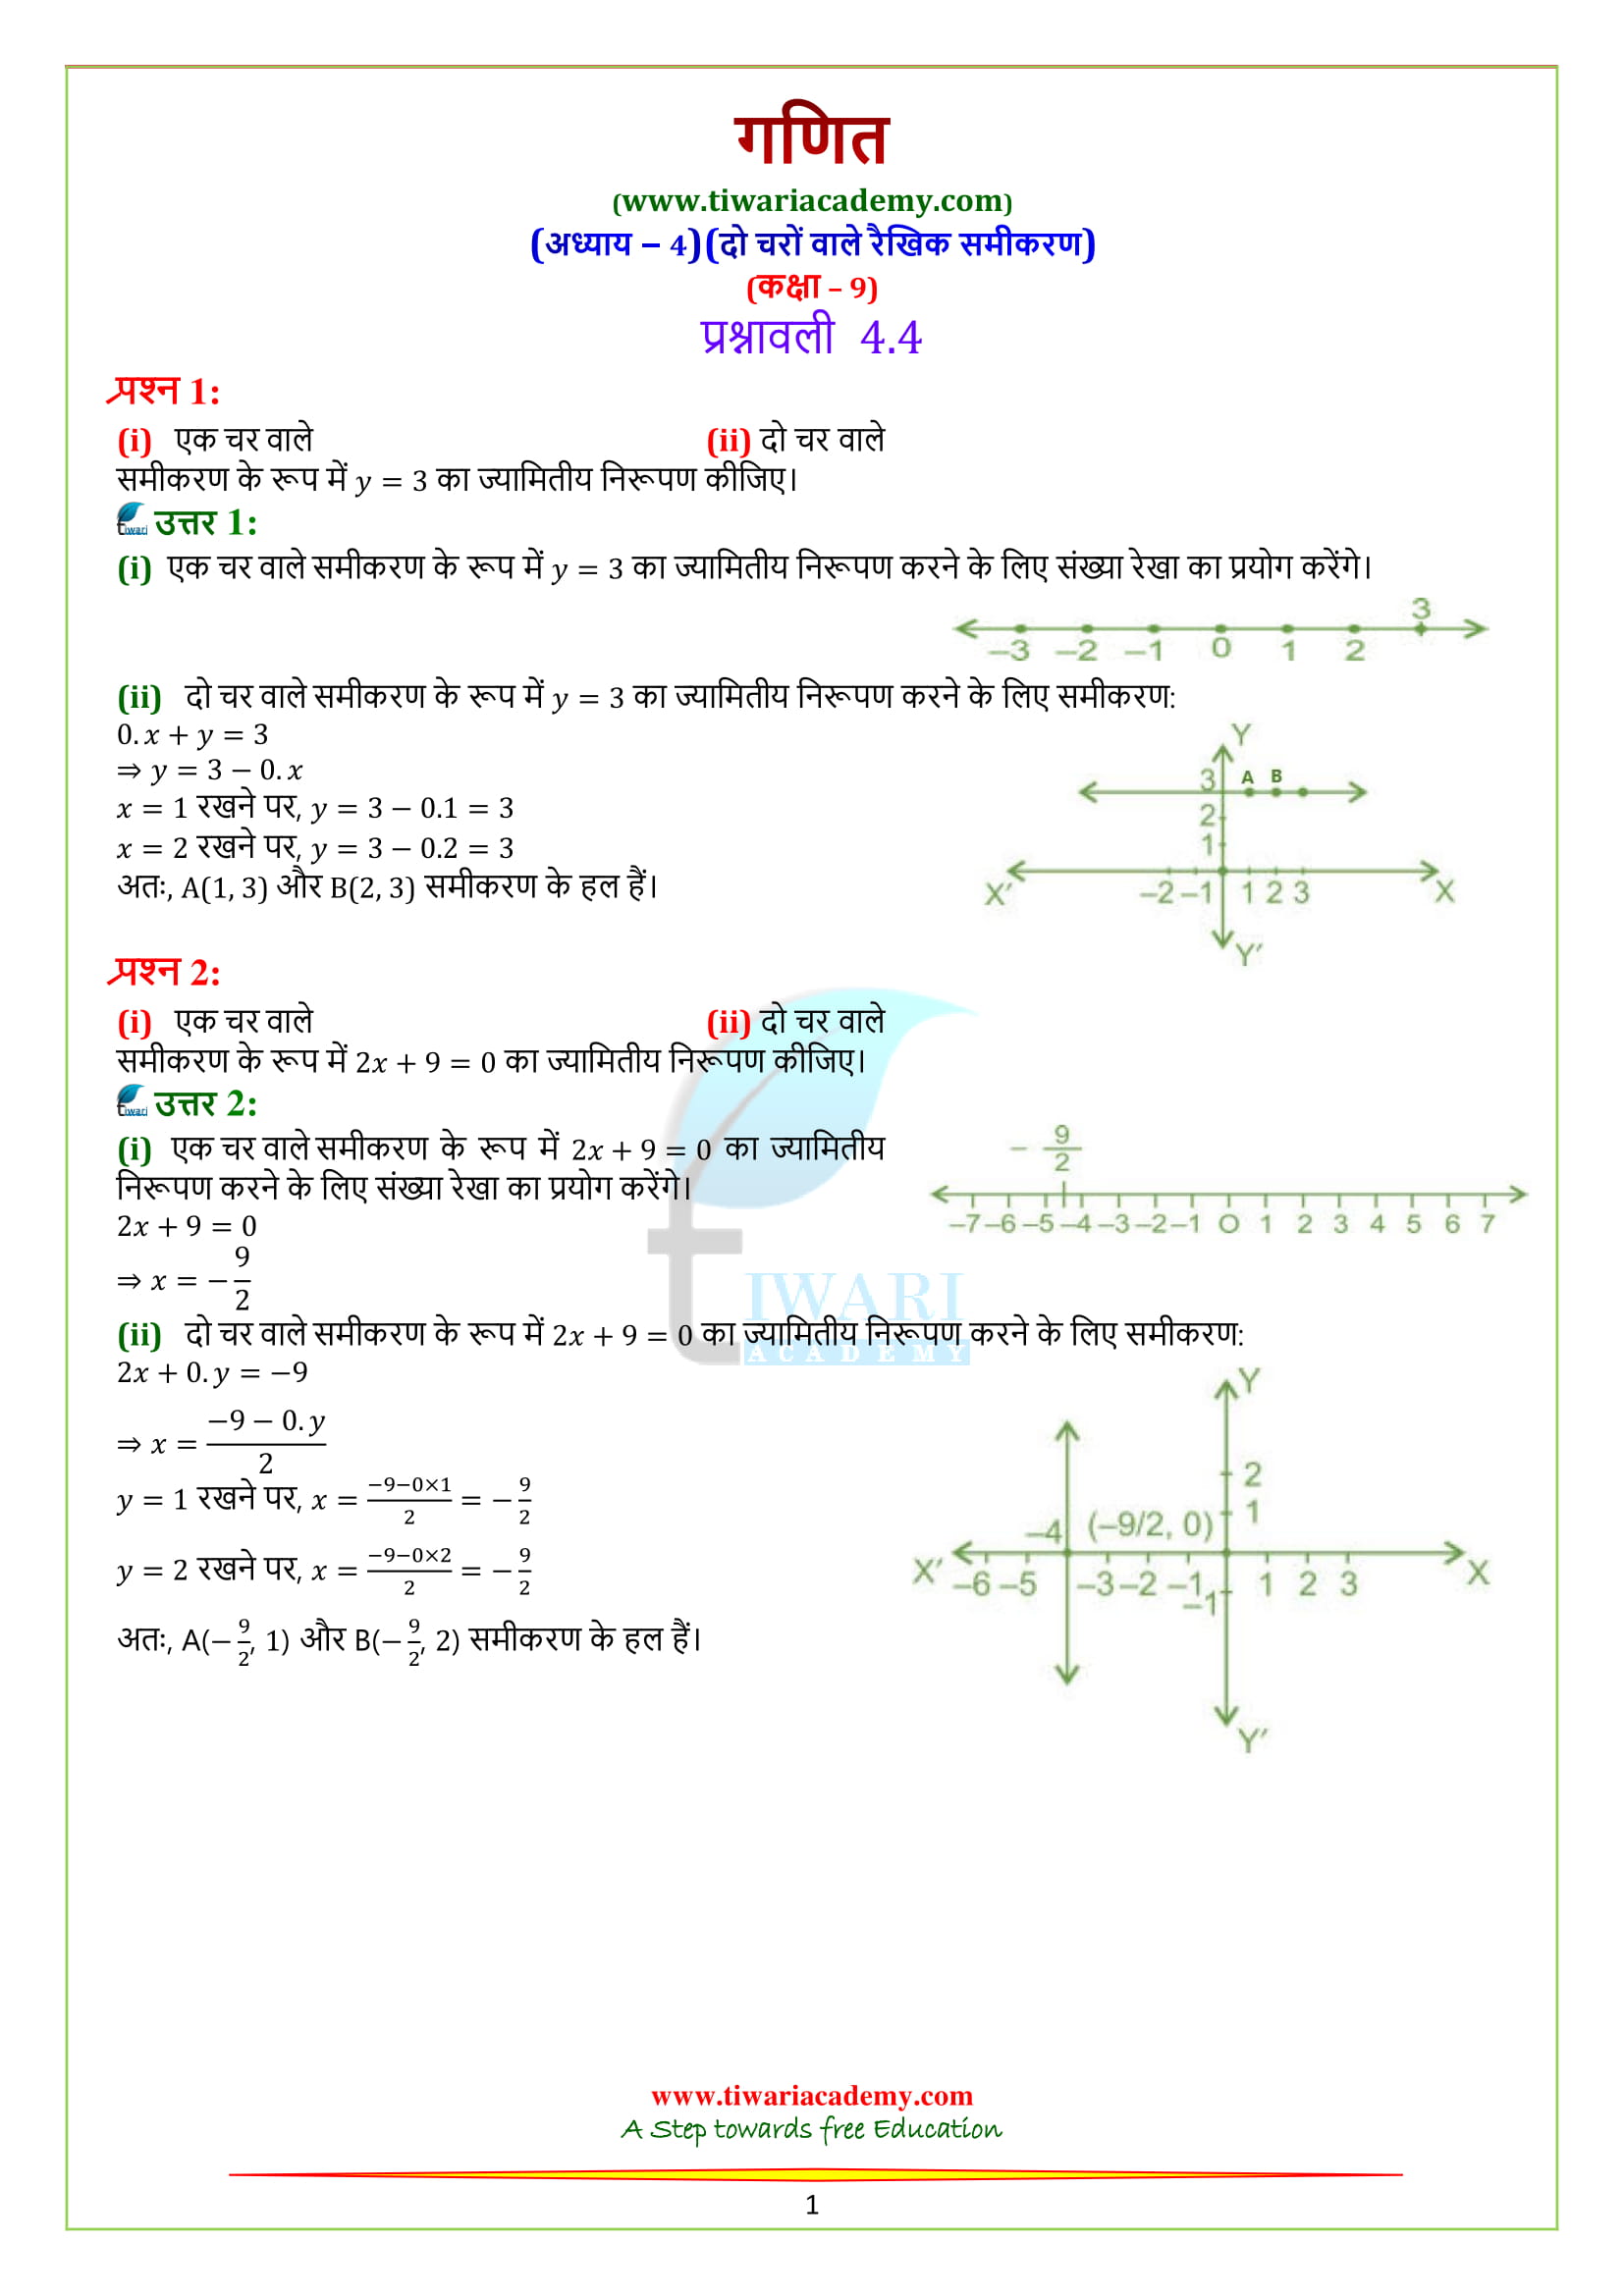 NCERT Solutions for Class 9 Maths Chapter 4 Exercise 4.4 in Hindi medium